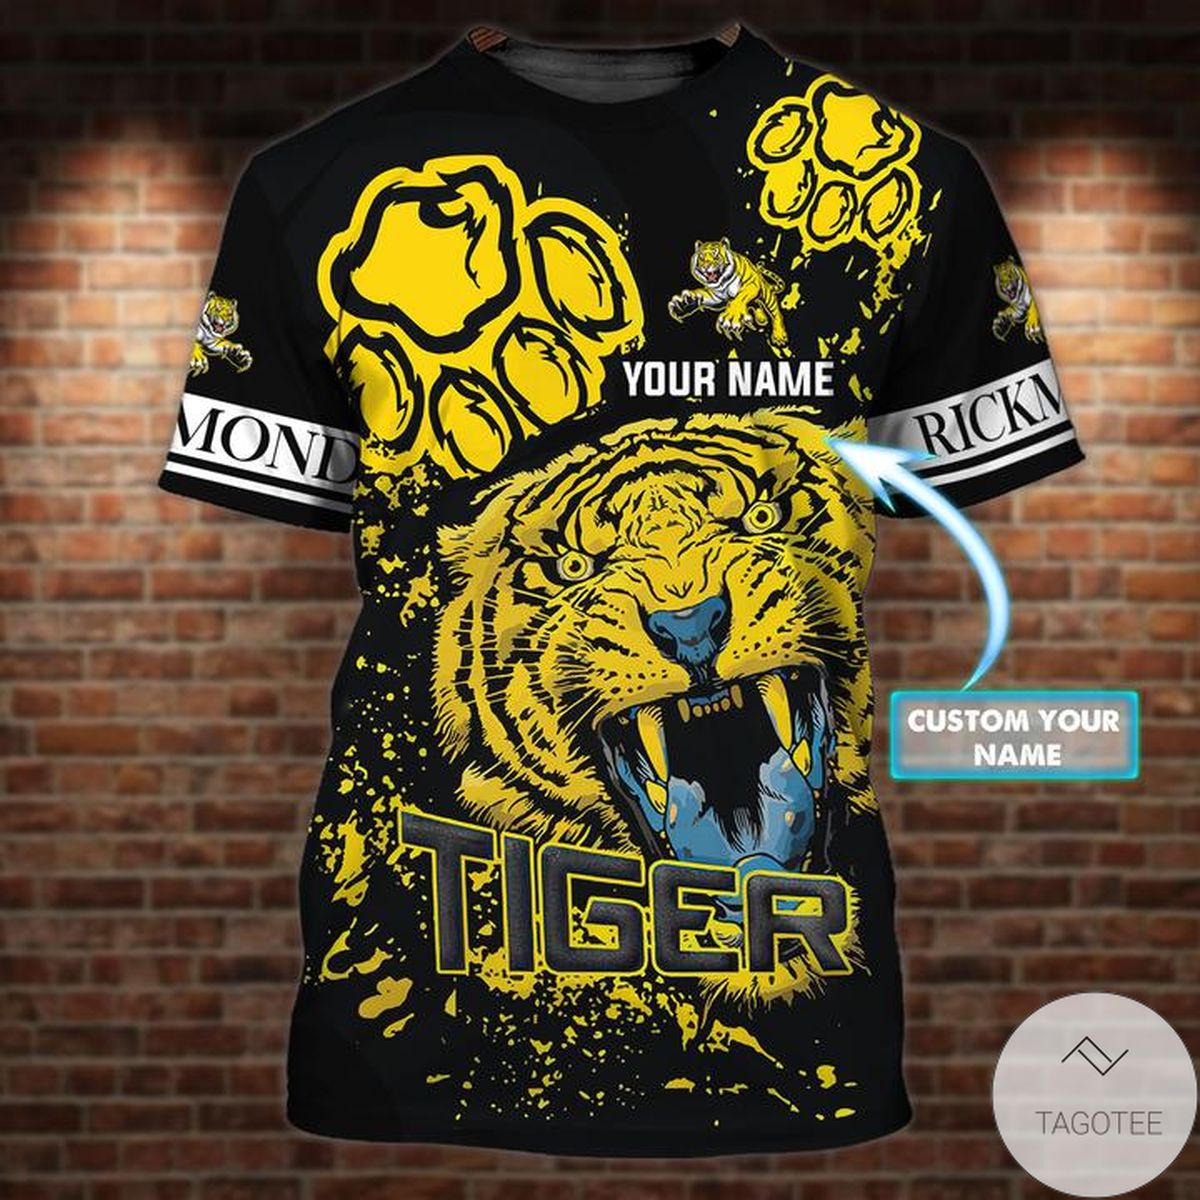 Personalized Richmond Tigers Printed 3d Shirt